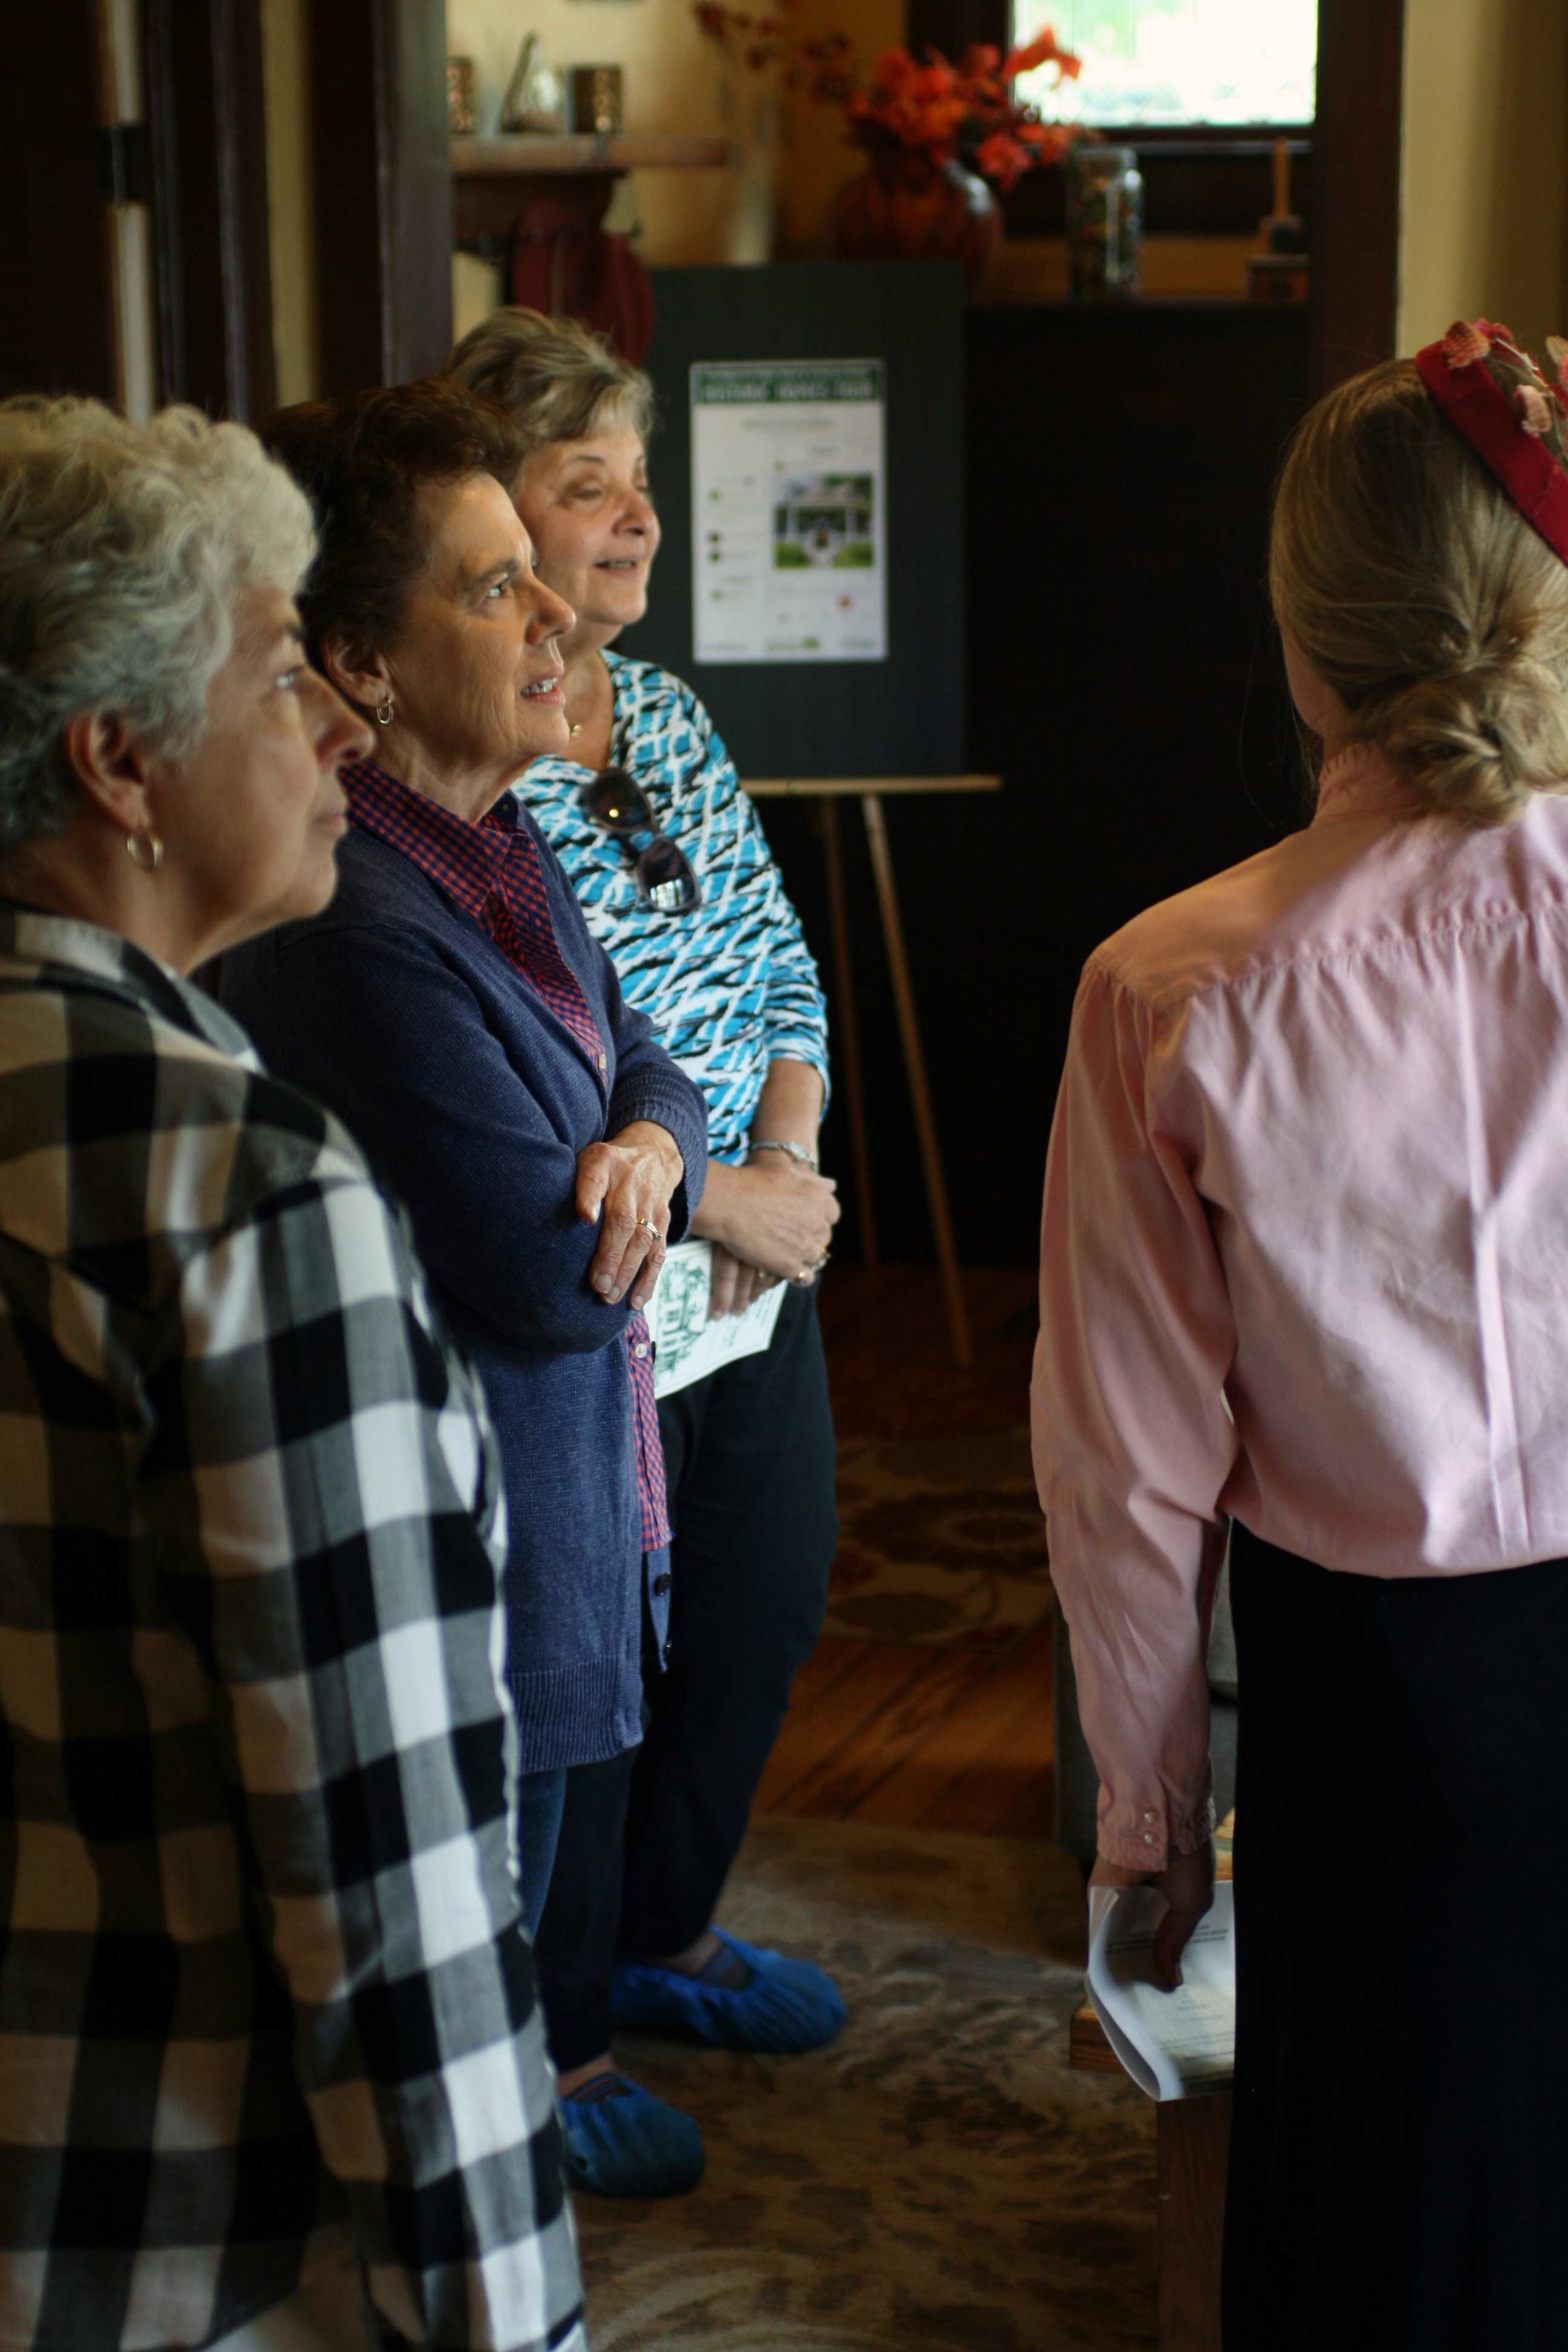  A volunteer docent informs attendees about the antique furniture in a historic home on Smith Street in Fort Collins 